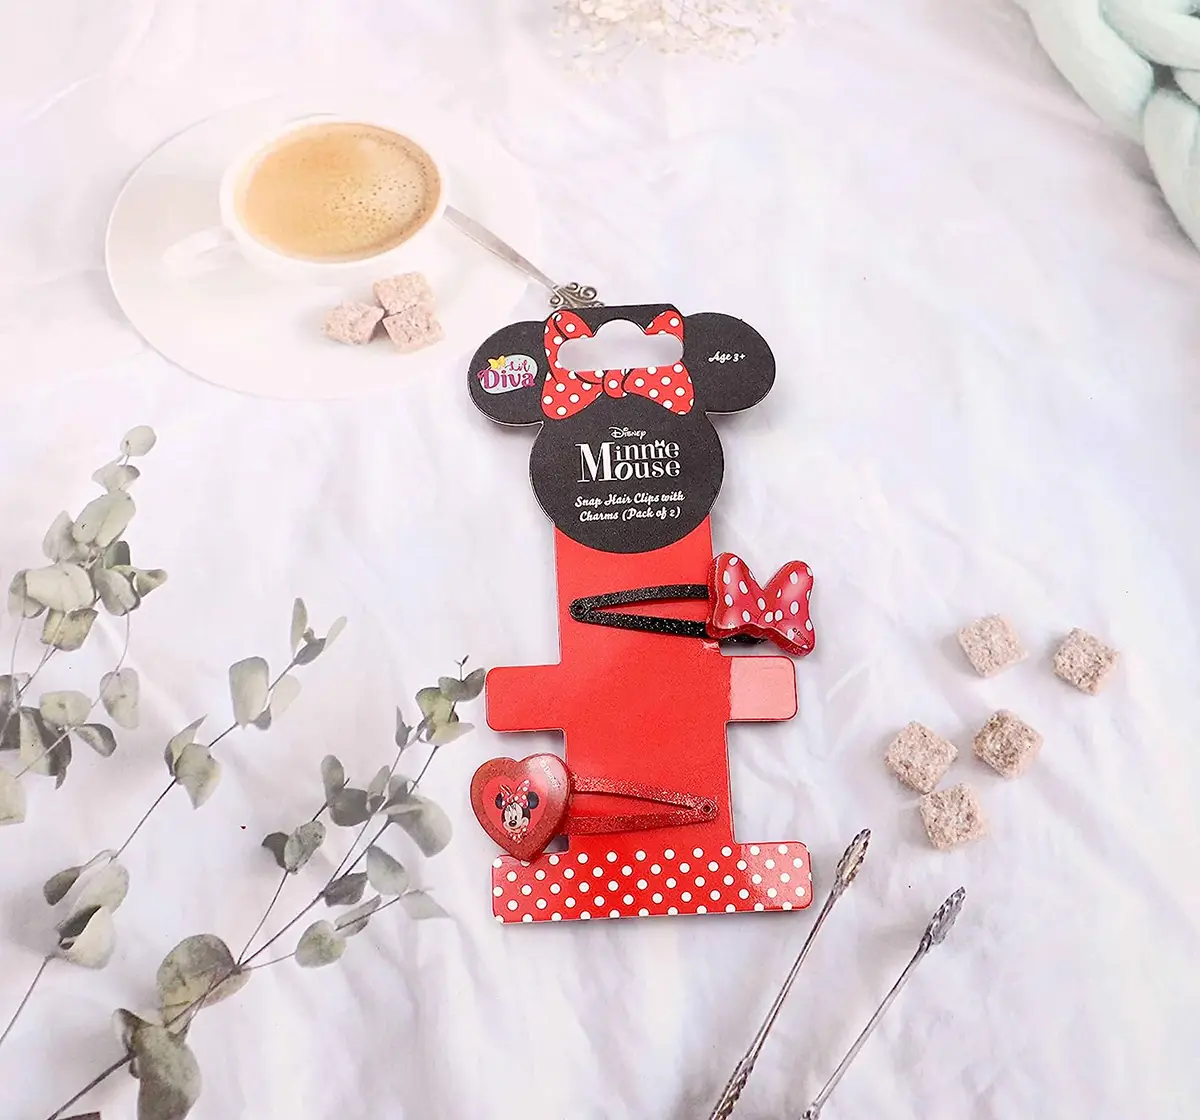 Li'l Diva Minnie Mouse Polka Dots Hair Clips with Bow Pack of 2 Red and Black For Girls of Age 3Y+, Multicolour